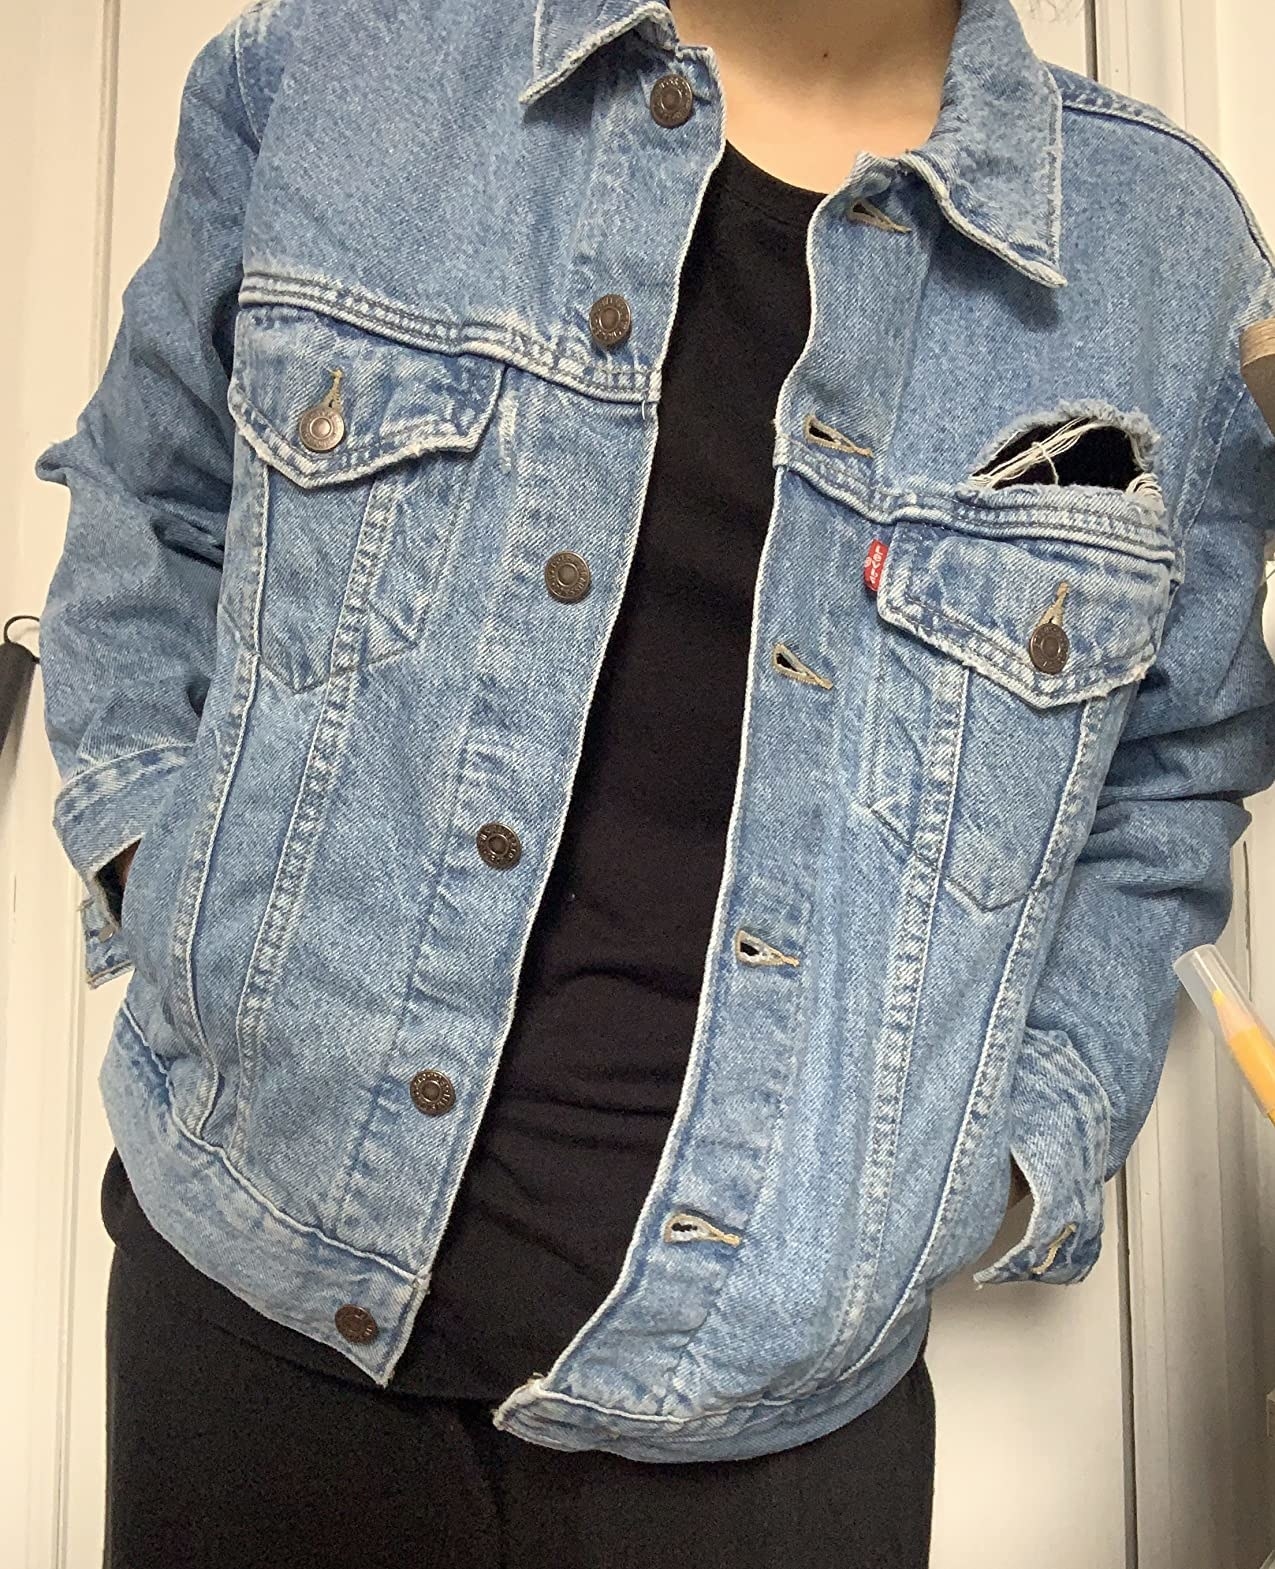 A review wearing an light wash denim jacket with all black outfit